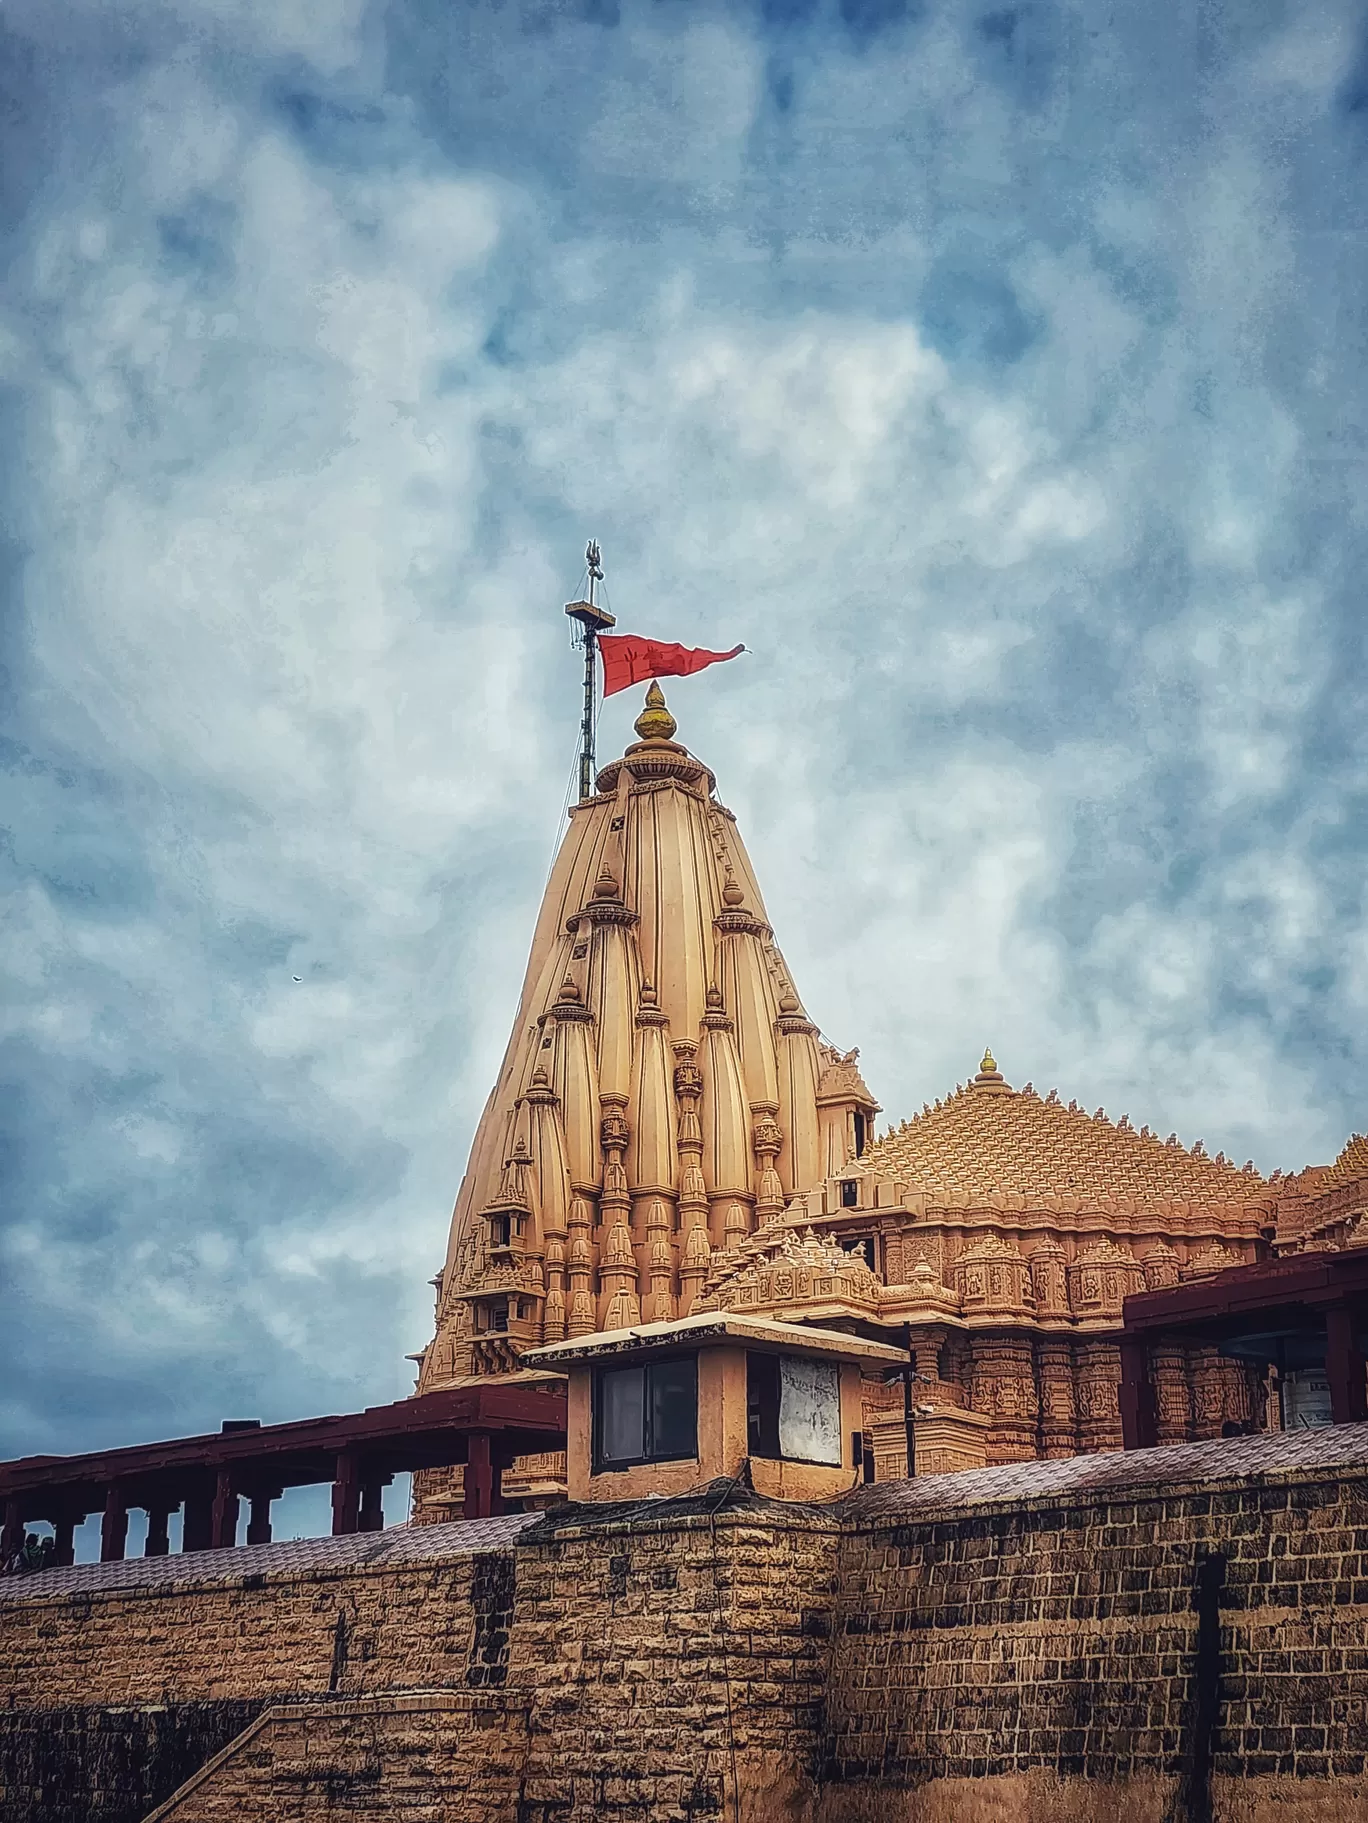 Photo of Shree Somnath Jyotirling Temple By _itchyfeettrips